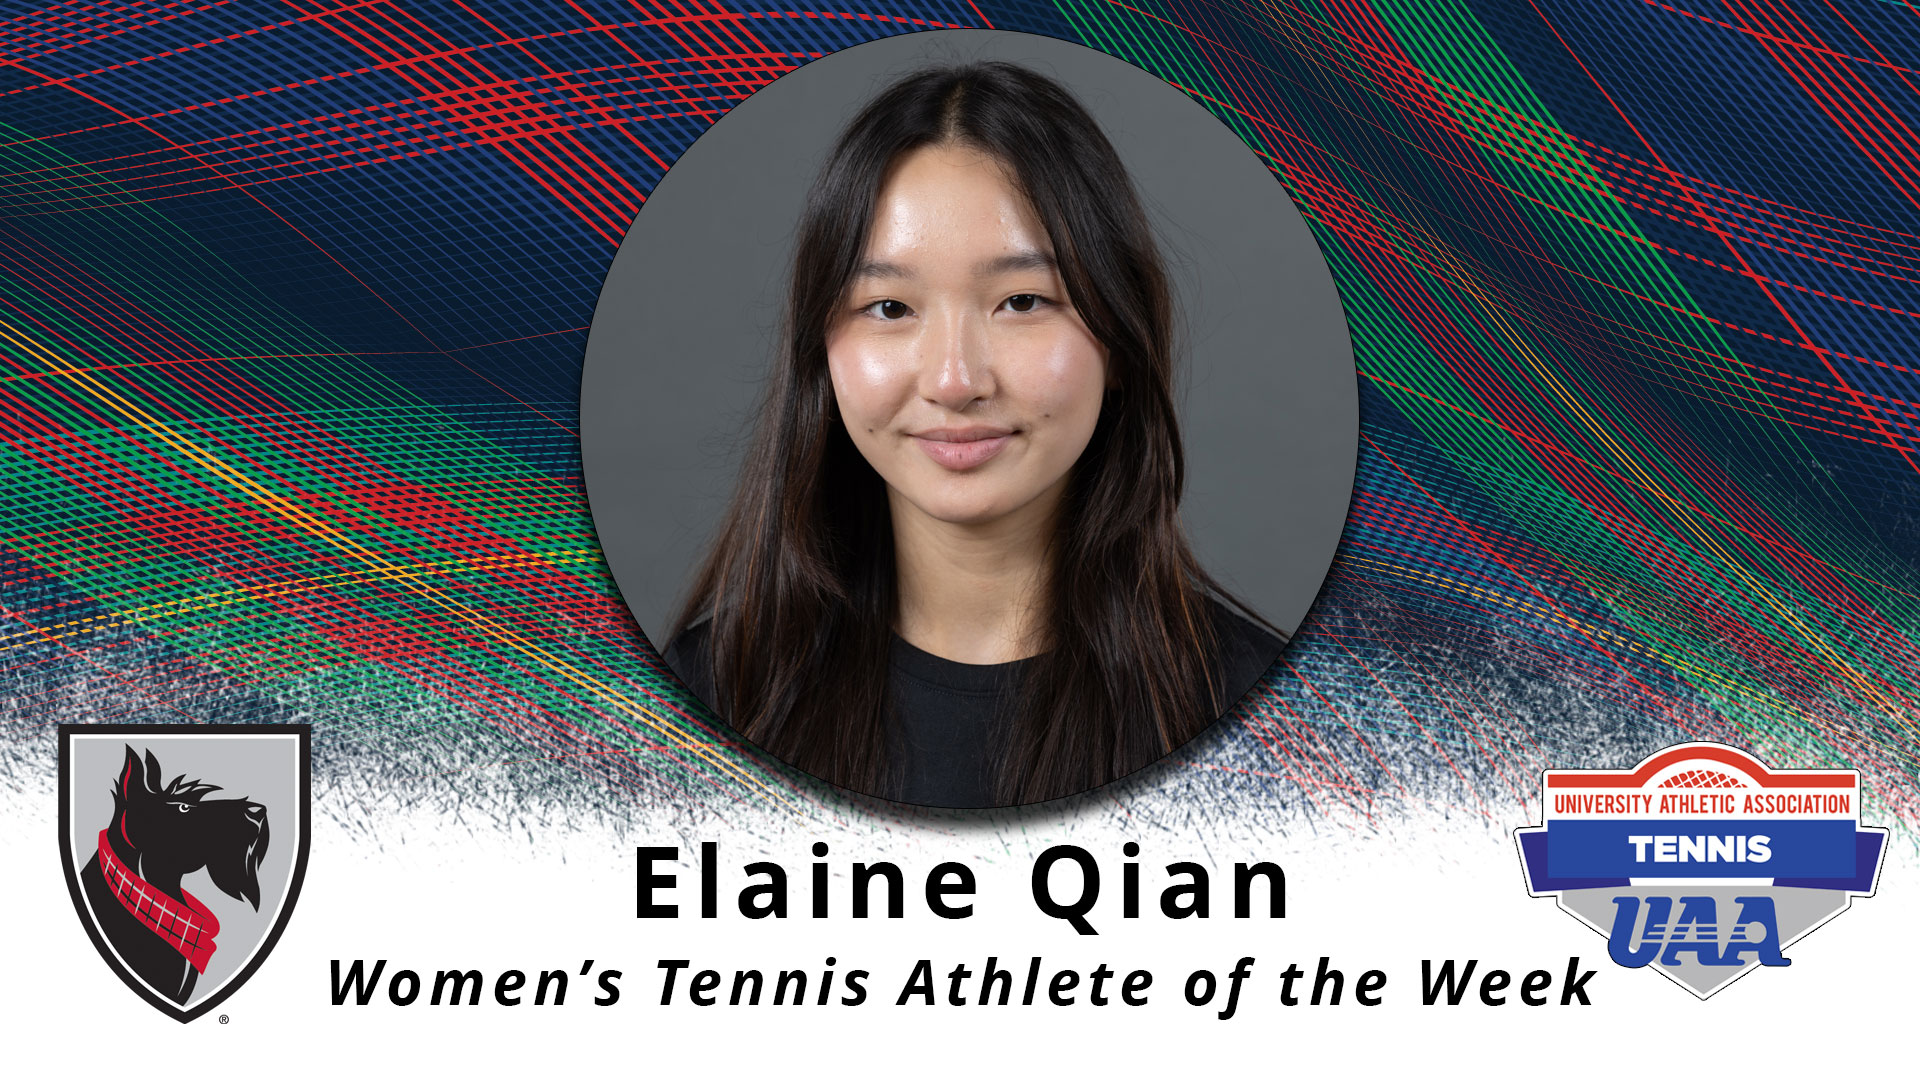 a portrait type photo of a female framed in a circle with text reading Elaine Qian Women's Tennis Athlete of the Week